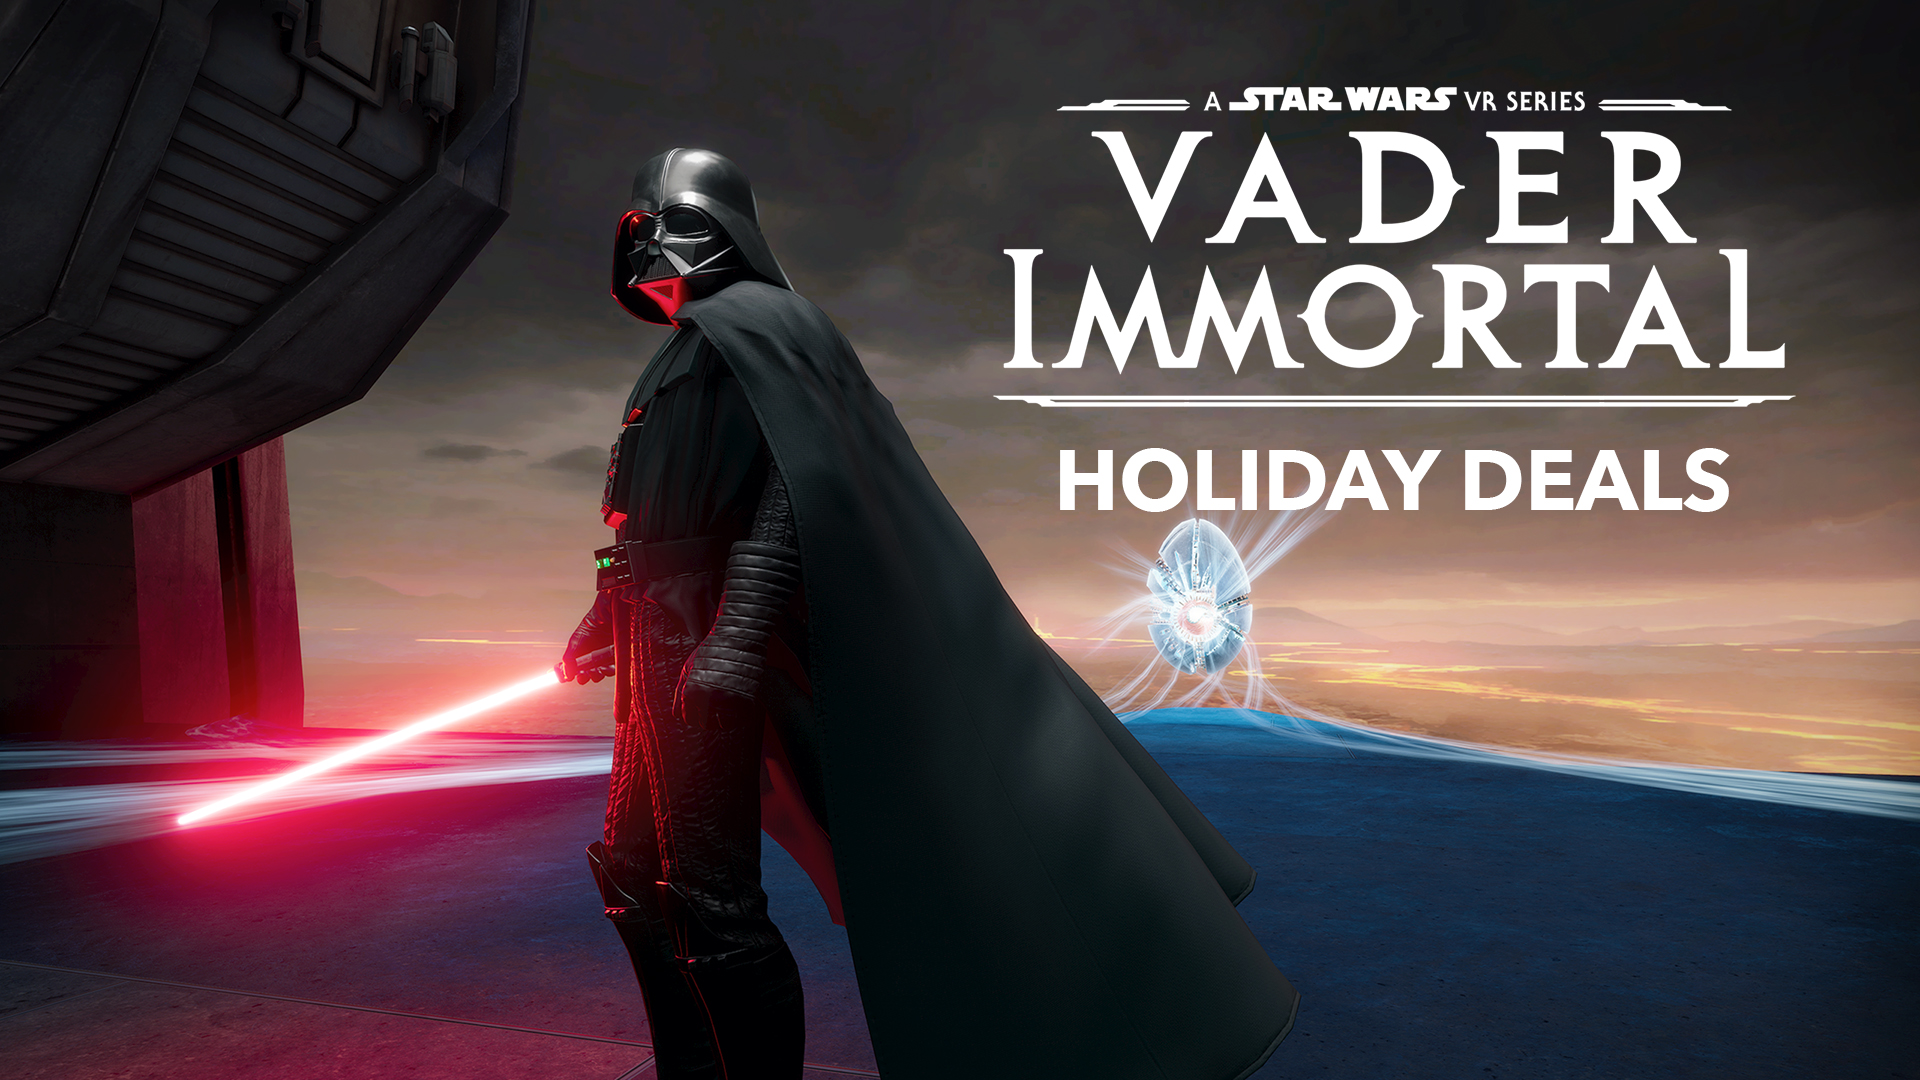 Special Holiday Deals on Vader Immortal: A Star Wars VR Series on Oculus Quest and PlayStation VR!